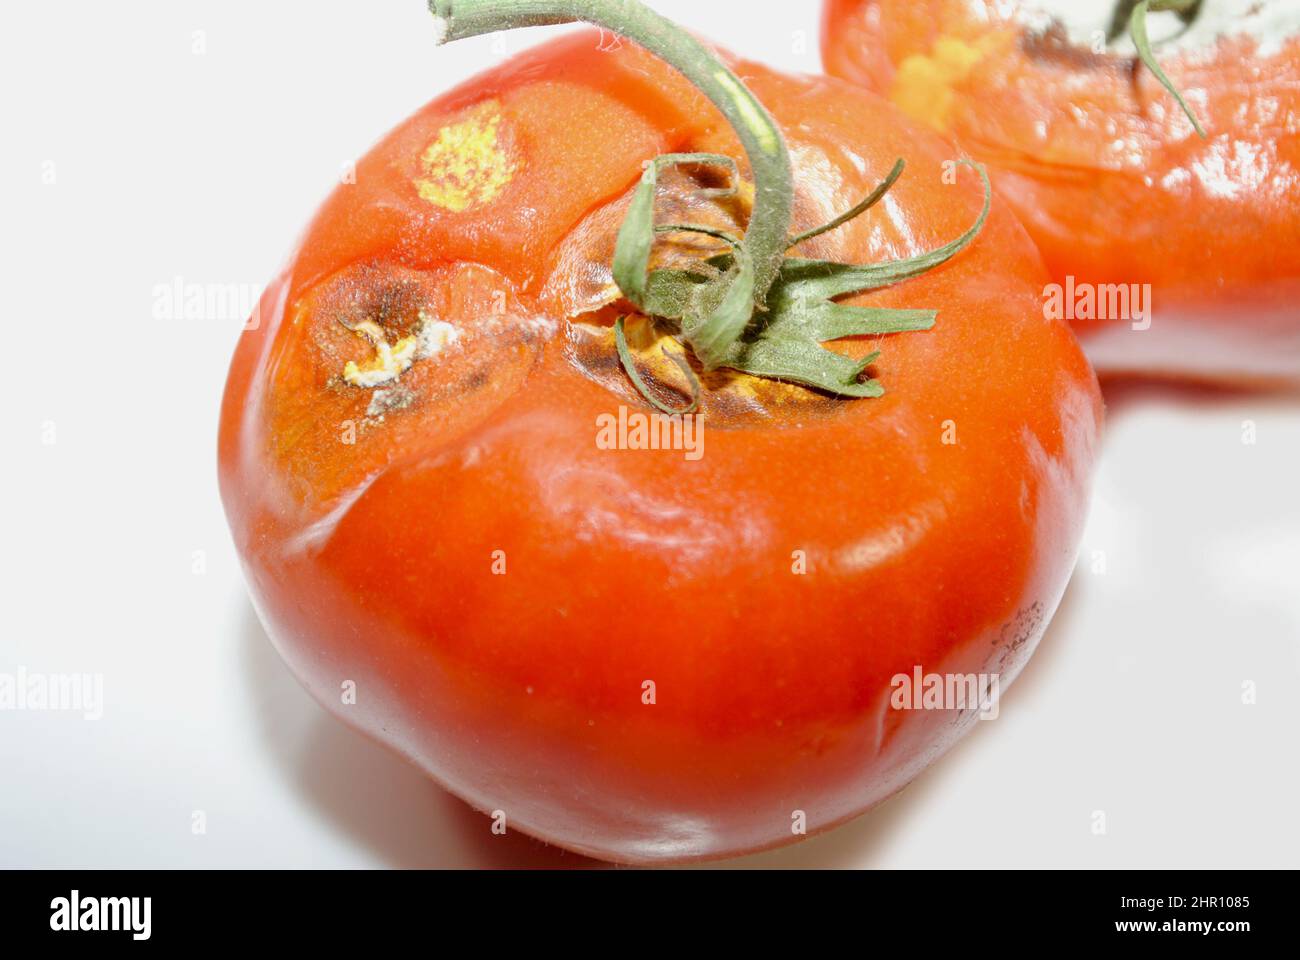 Close-Up of Rotting Vined Red Tomatoes on a White Background Stock Photo